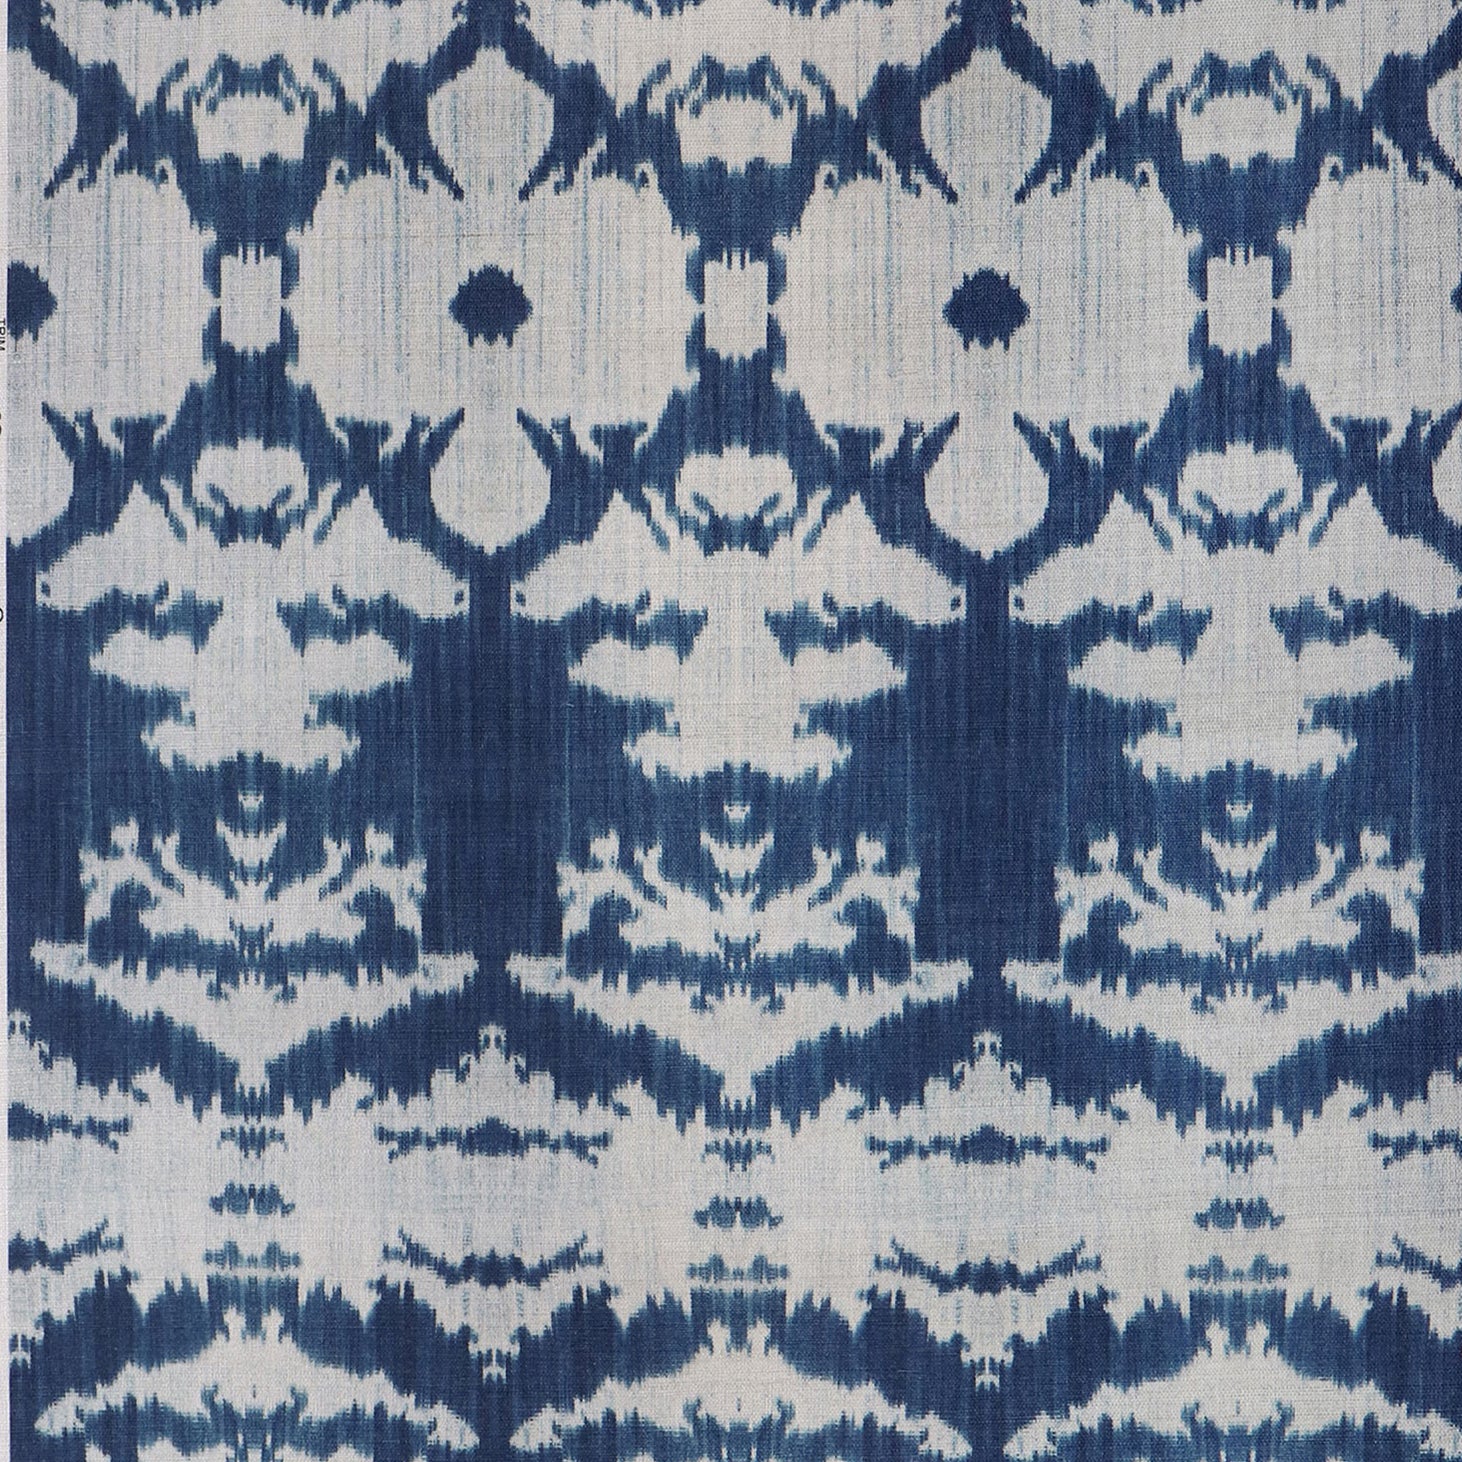 Detail of wallpaper in an ikat pattern in blue and greige.